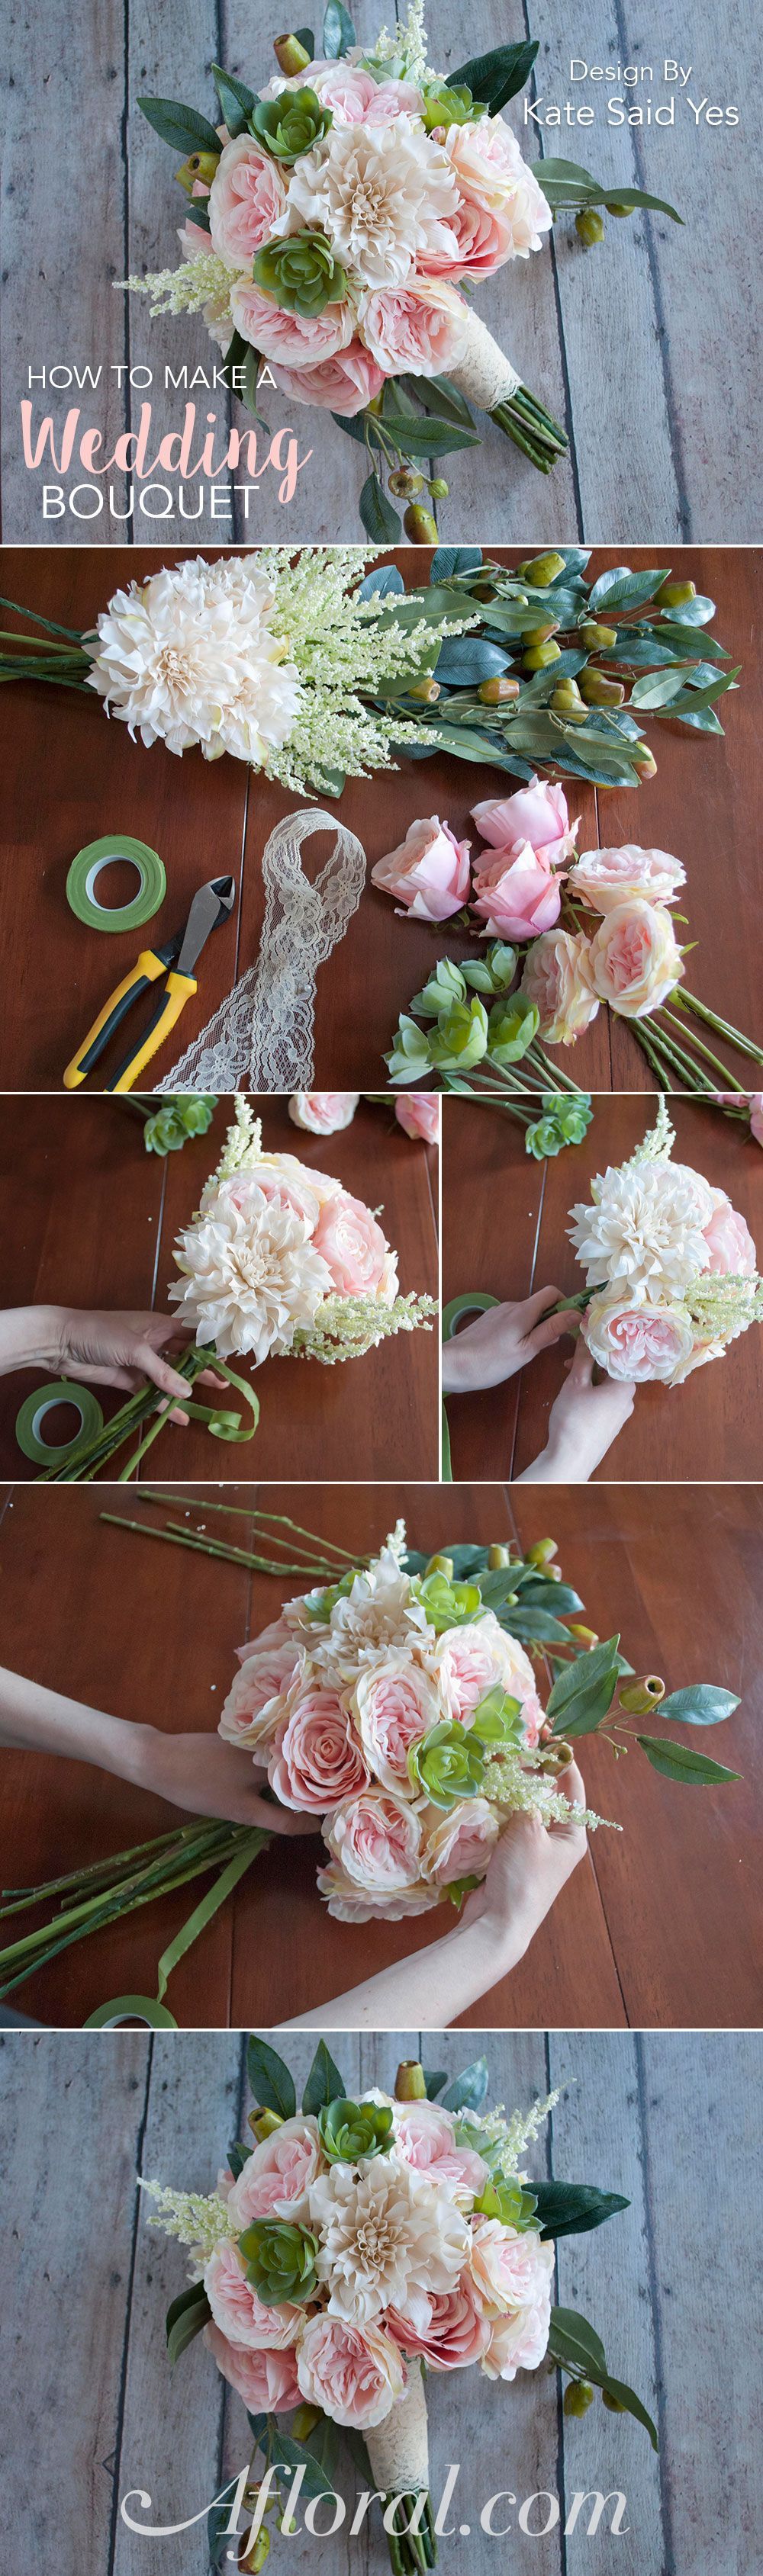 How to make a wedding bouquet with silk flowers from www.afloral.com/. #fauxflowers Design by Kate Sai